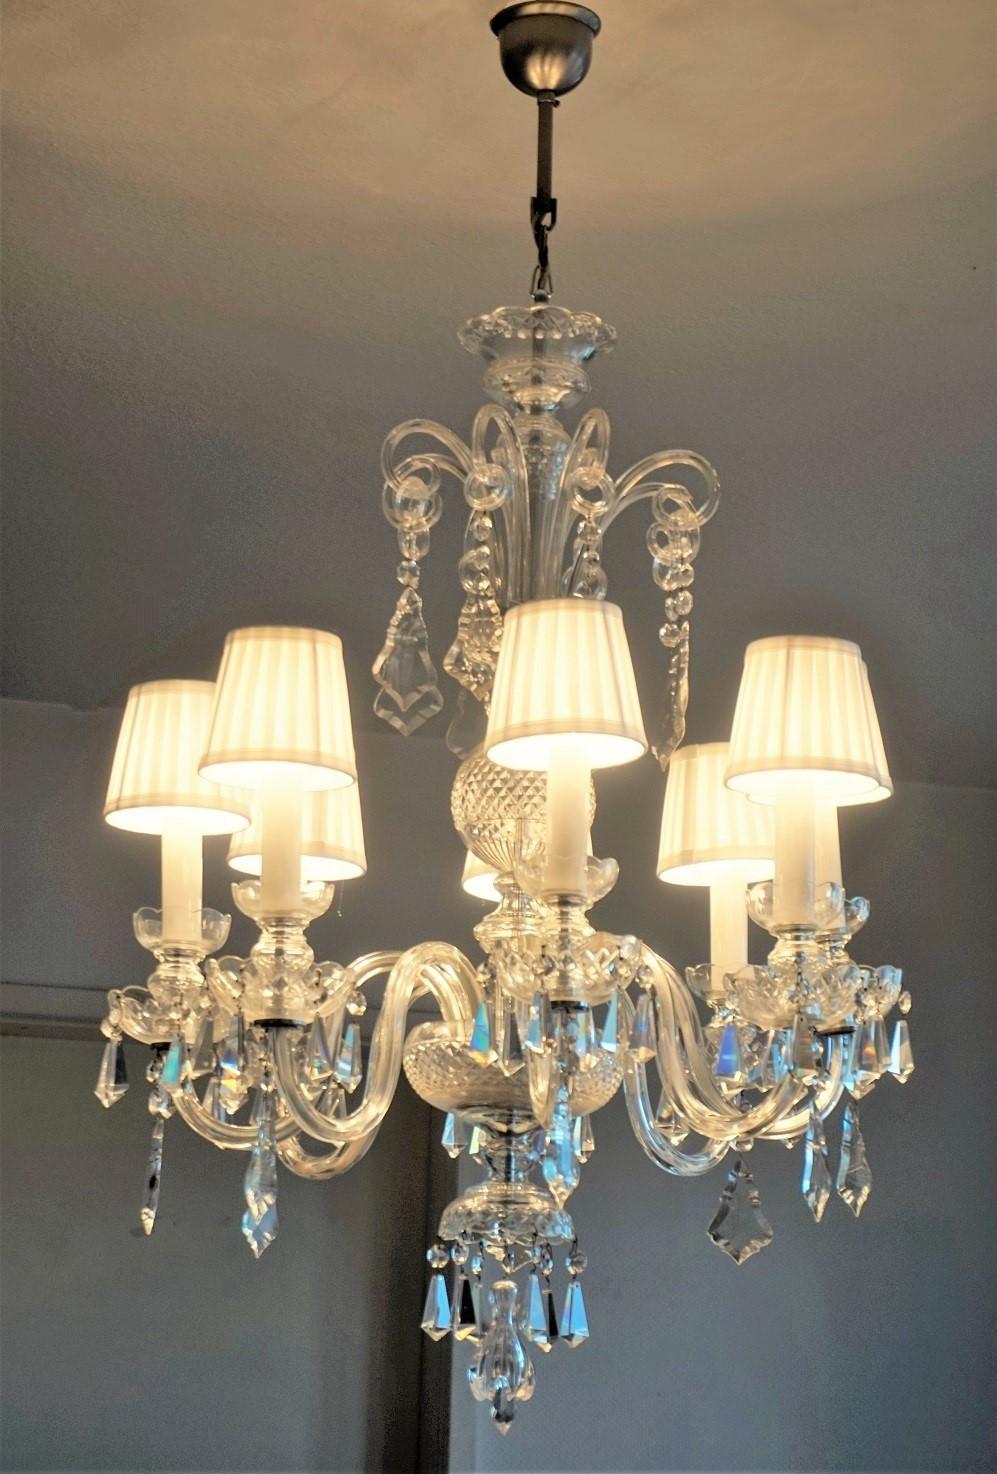 Faceted Large Original Venetian Handcrafted Murano Crystal Chandelier, Italy, 1910-1920 For Sale